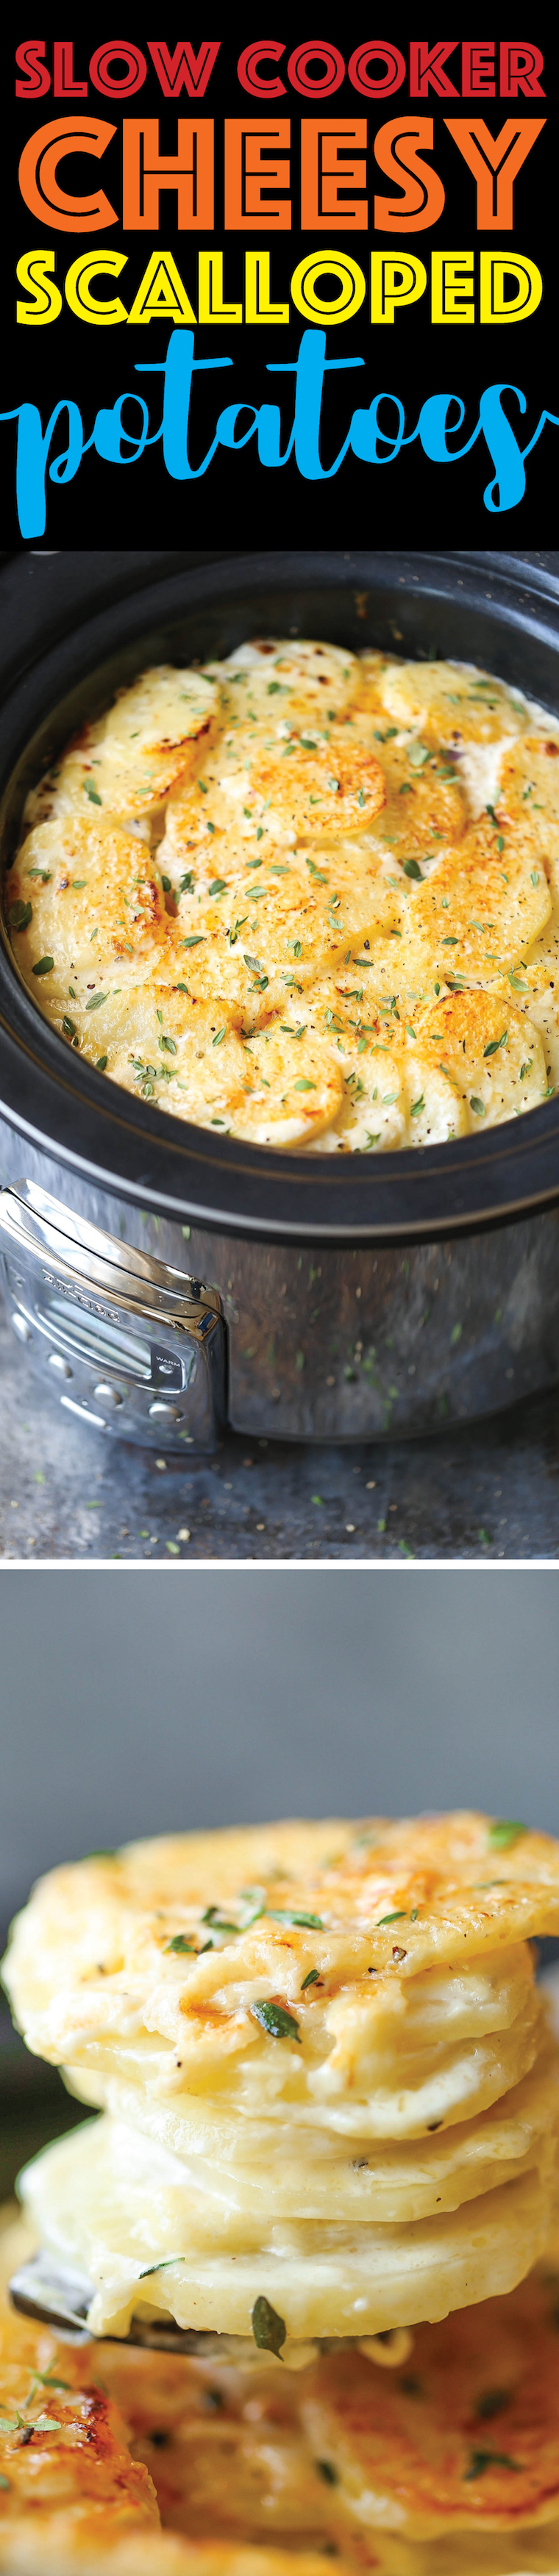 Slow Cooker Cheesy Scalloped Potatoes - This crockpot version of scalloped potatoes is so EASY, creamy, tender and cheesy! And it frees up your oven space!